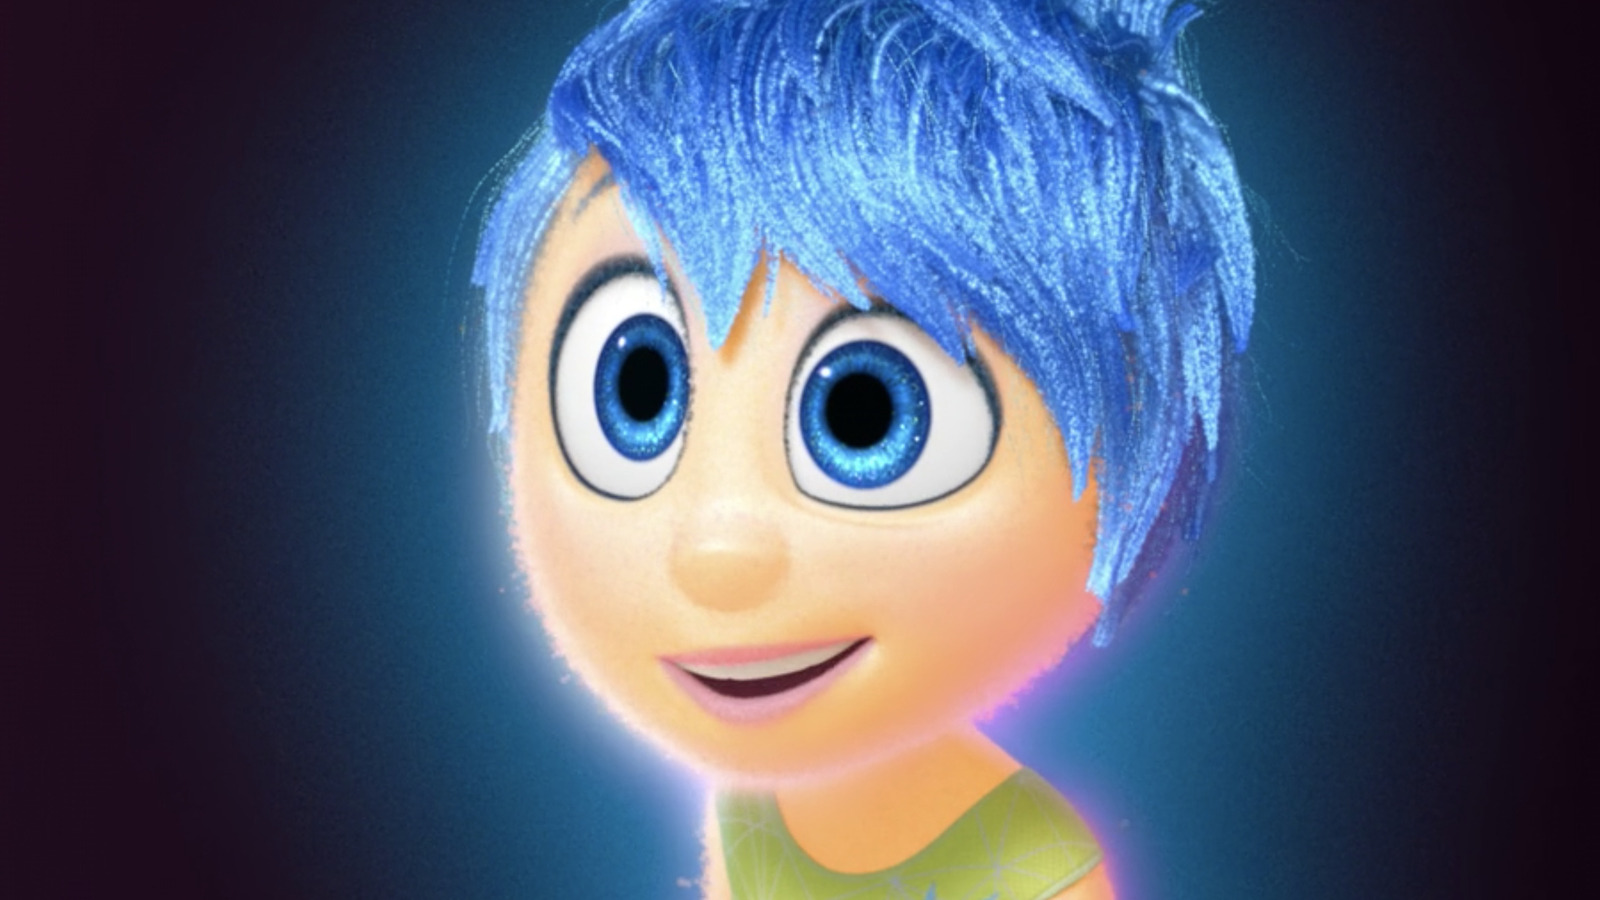 5 Steps To Draw A Cartoon Character: Anger (Inside Out) Using